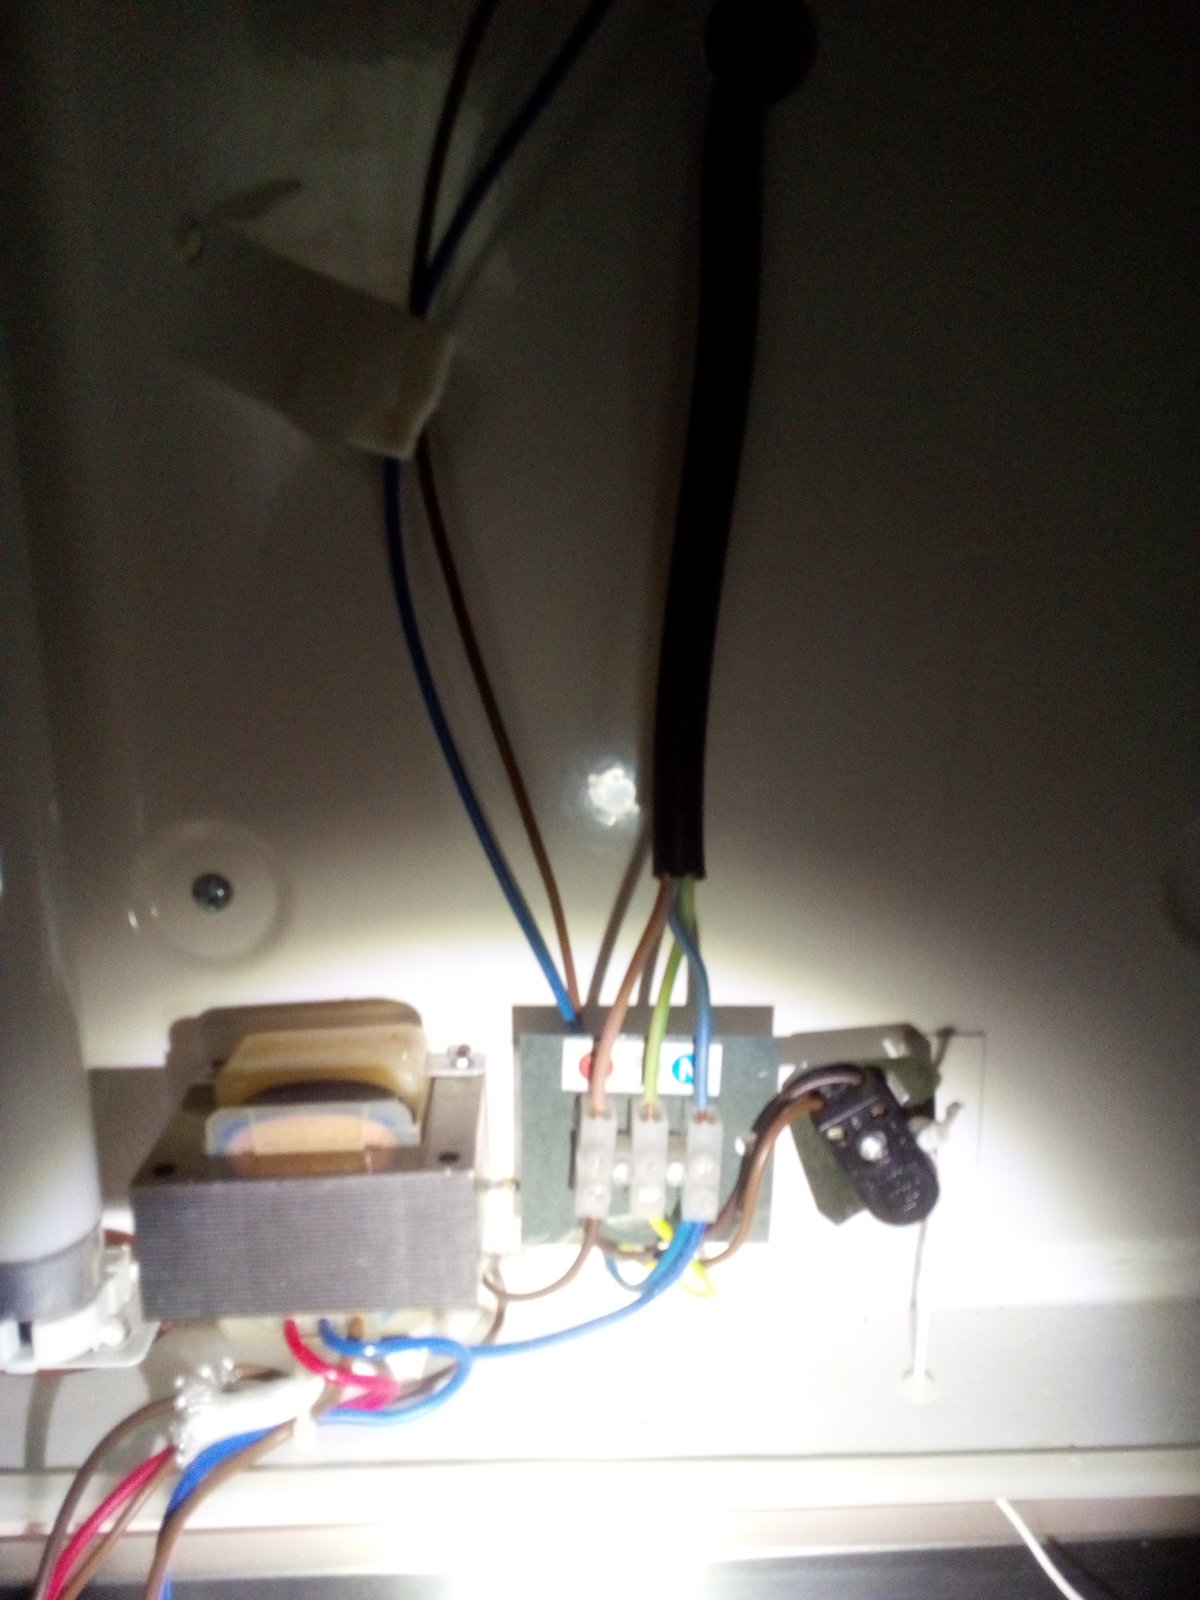 Bathroom mirror and shaver socket | DIYnot Forums electrical wiring light switch and schematic 